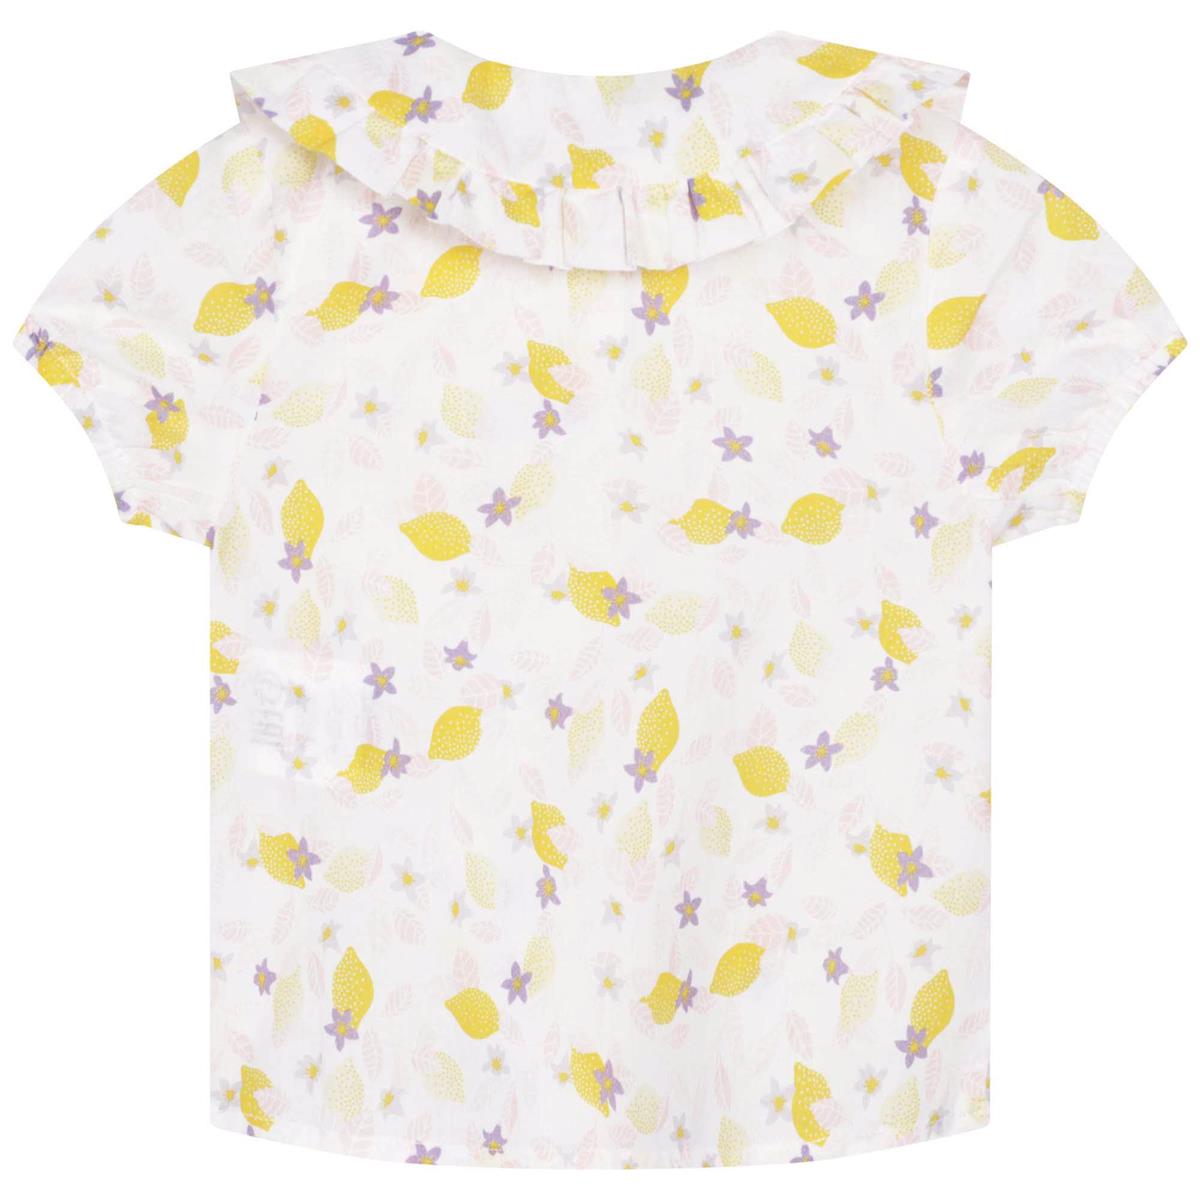 Girls White Floral Top